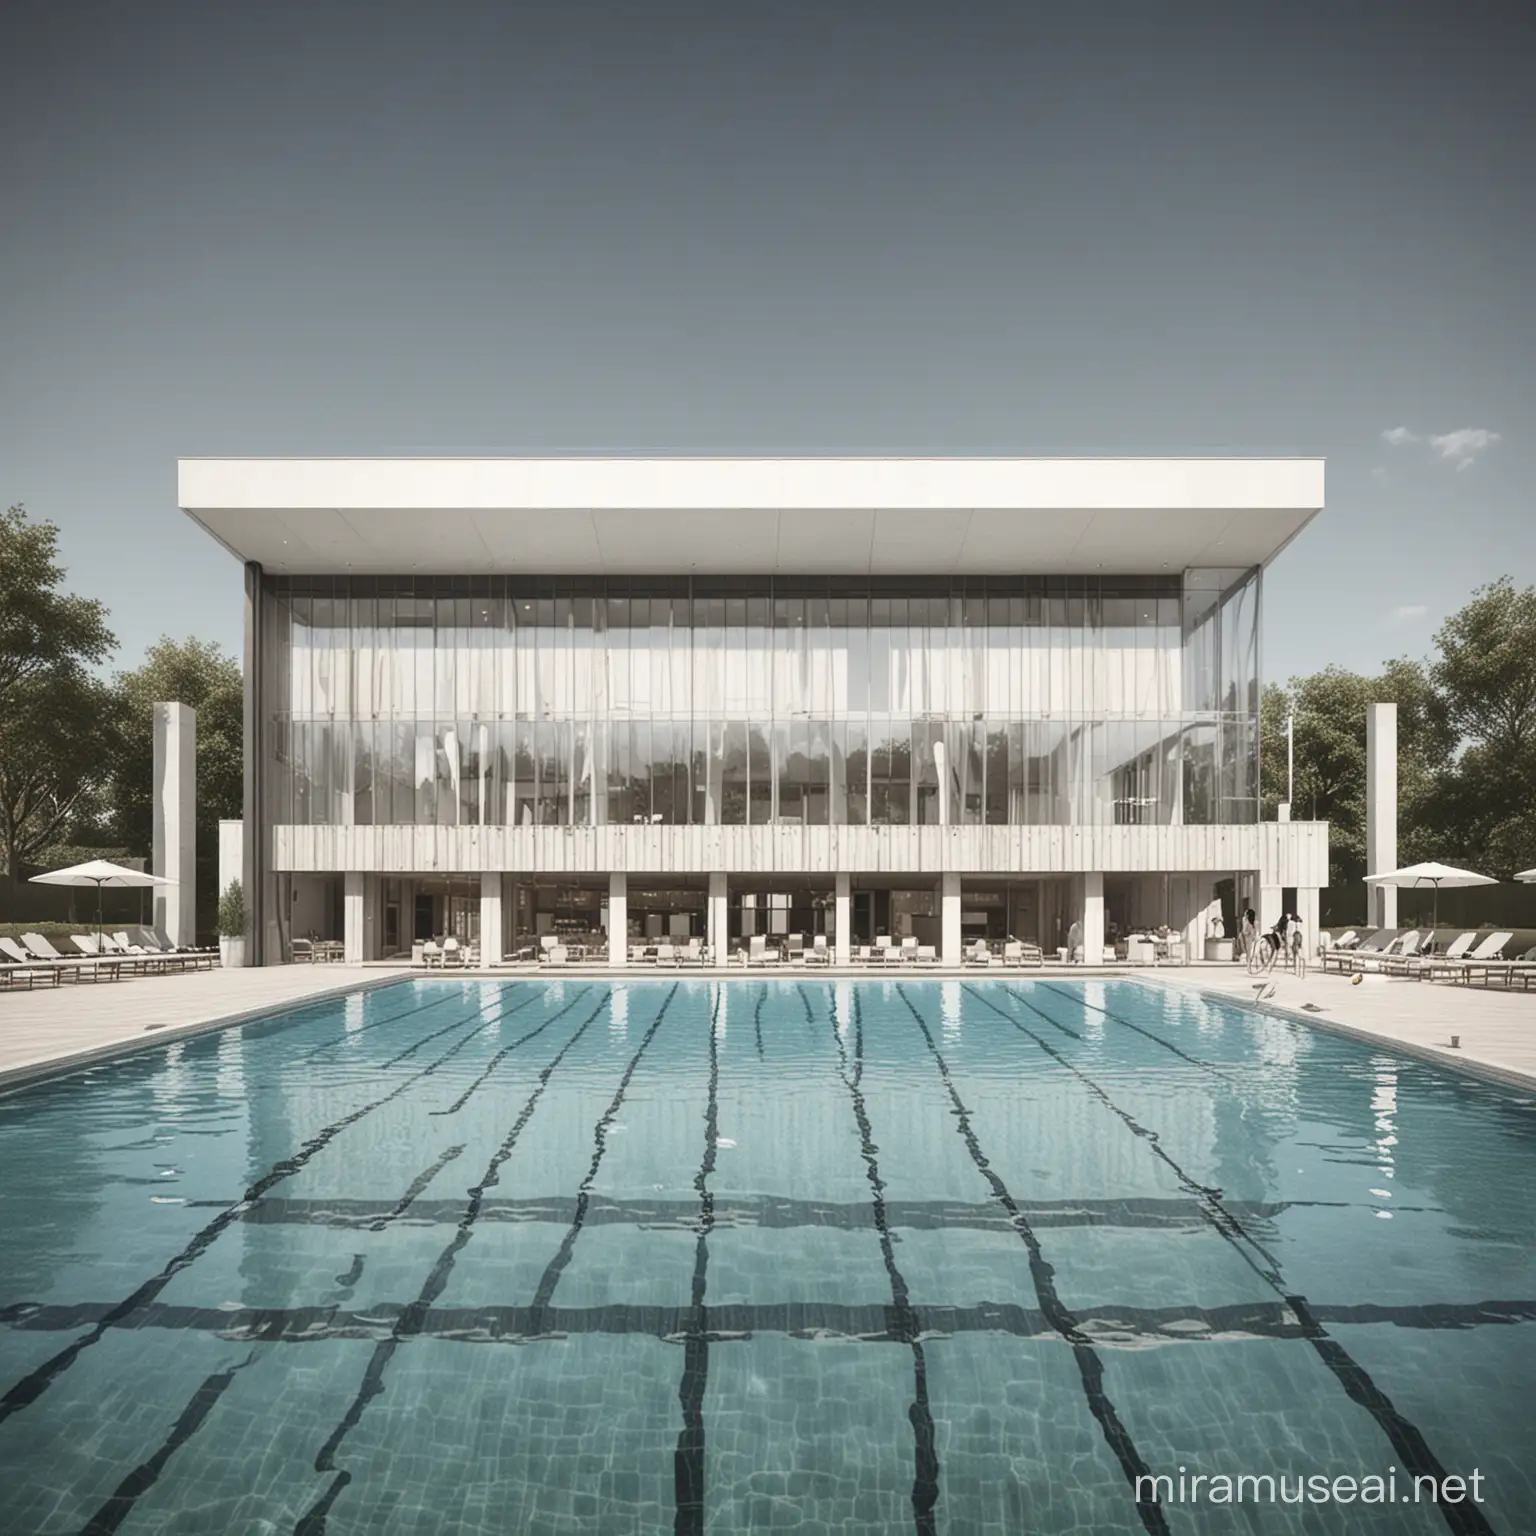 A farchitecture elevation of recreational swimming pool building with a rectangular plan, half of which is intended for swimming pools and the other half  is 2 floor restaurants, changing rooms and shops. The pool roof shows this division withHIGHT difference 
Everything is one building, 

